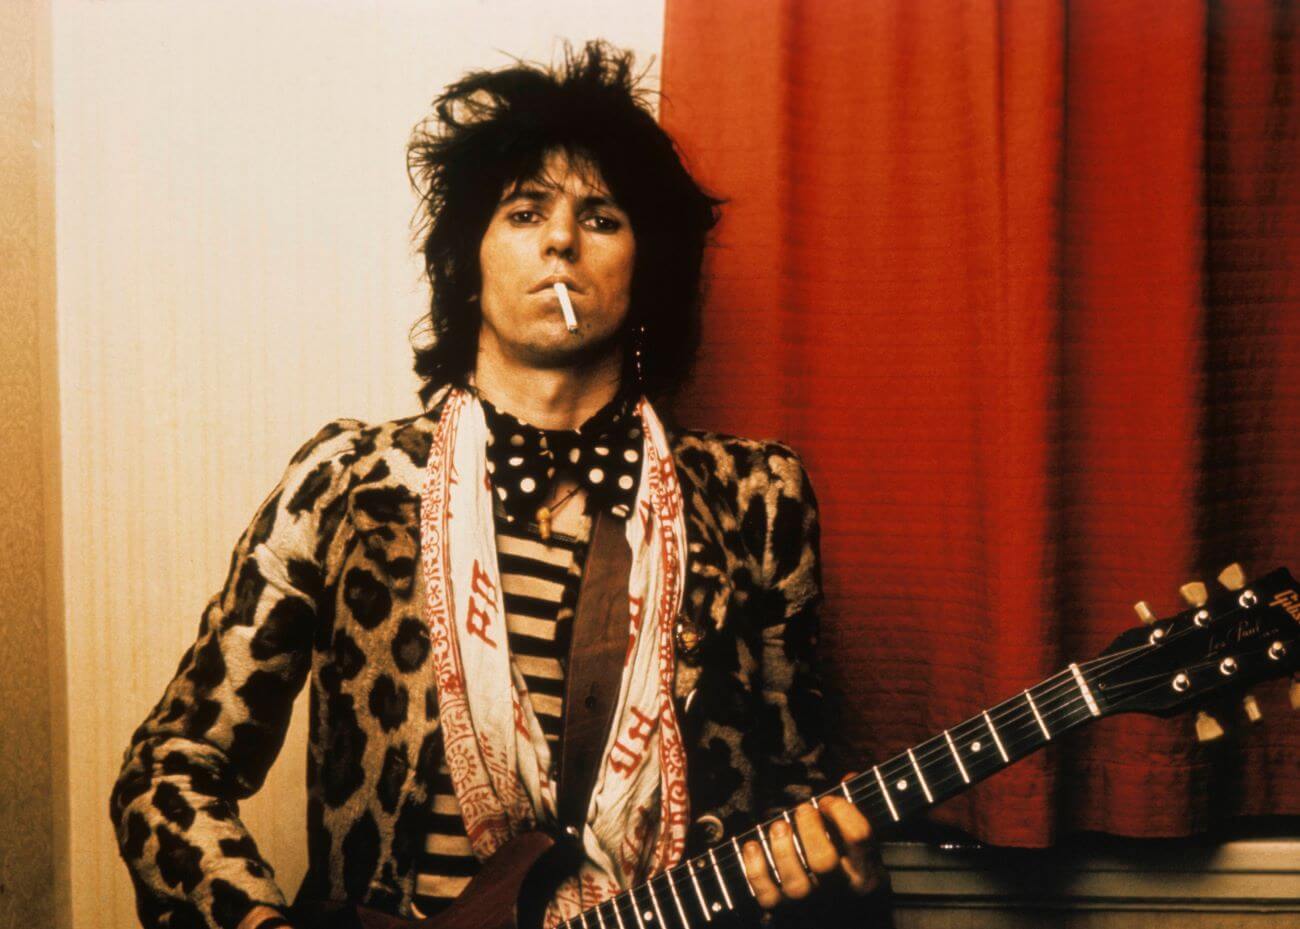 Keith Richards holds a cigarette in his mouth and holds a guitar.